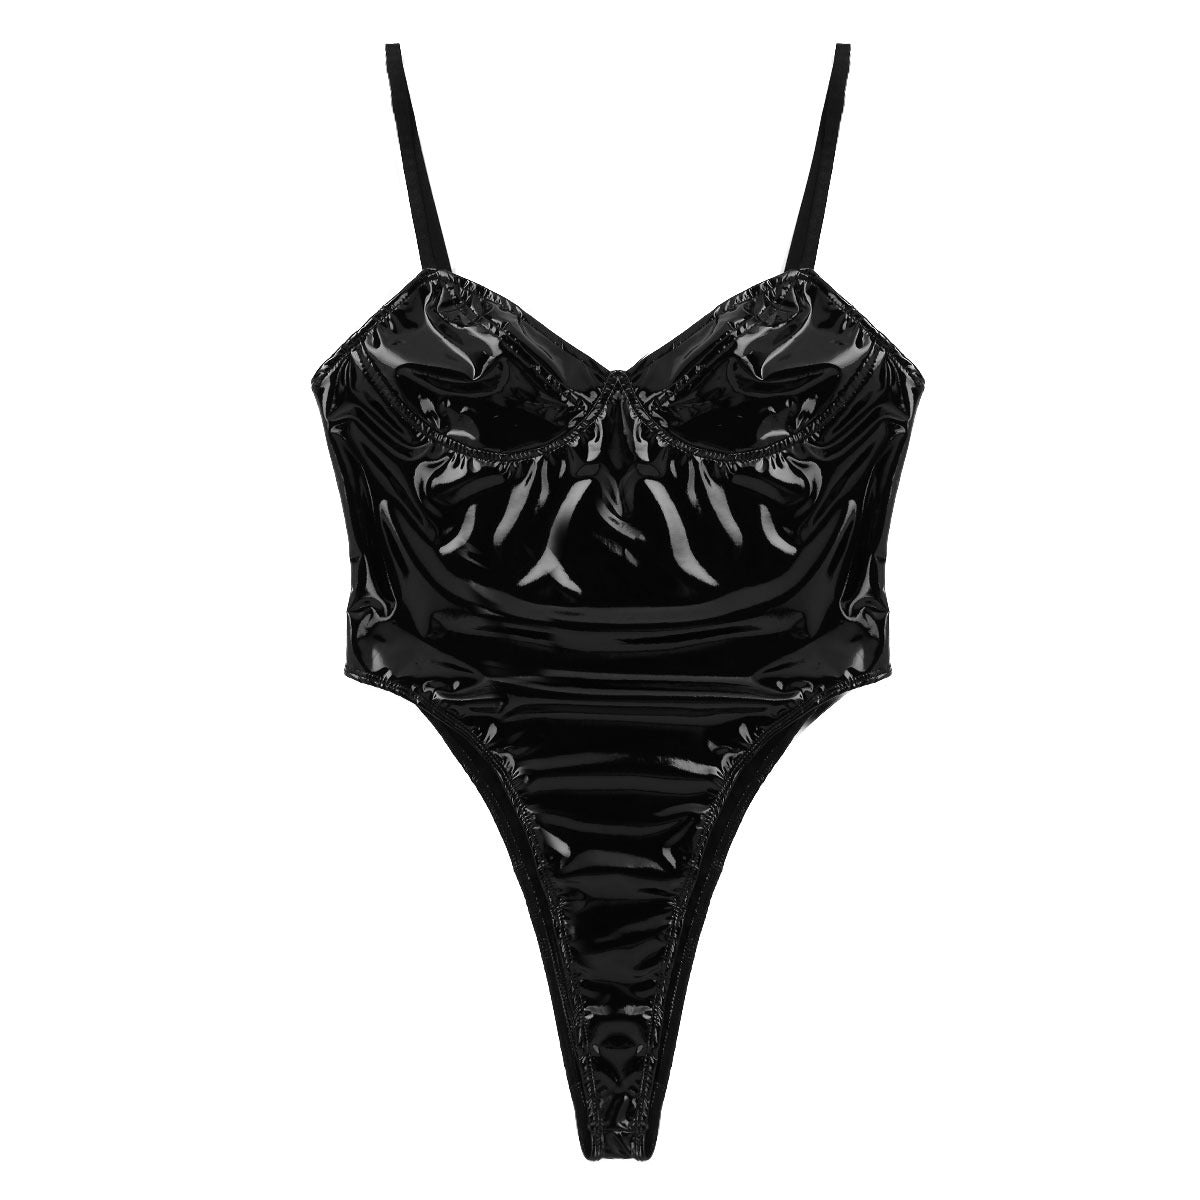 Women's Black Patent Leather Sexy Bodysuit / Adjustable Straps Push-Up High Cut Thong Bodysuits - HARD'N'HEAVY